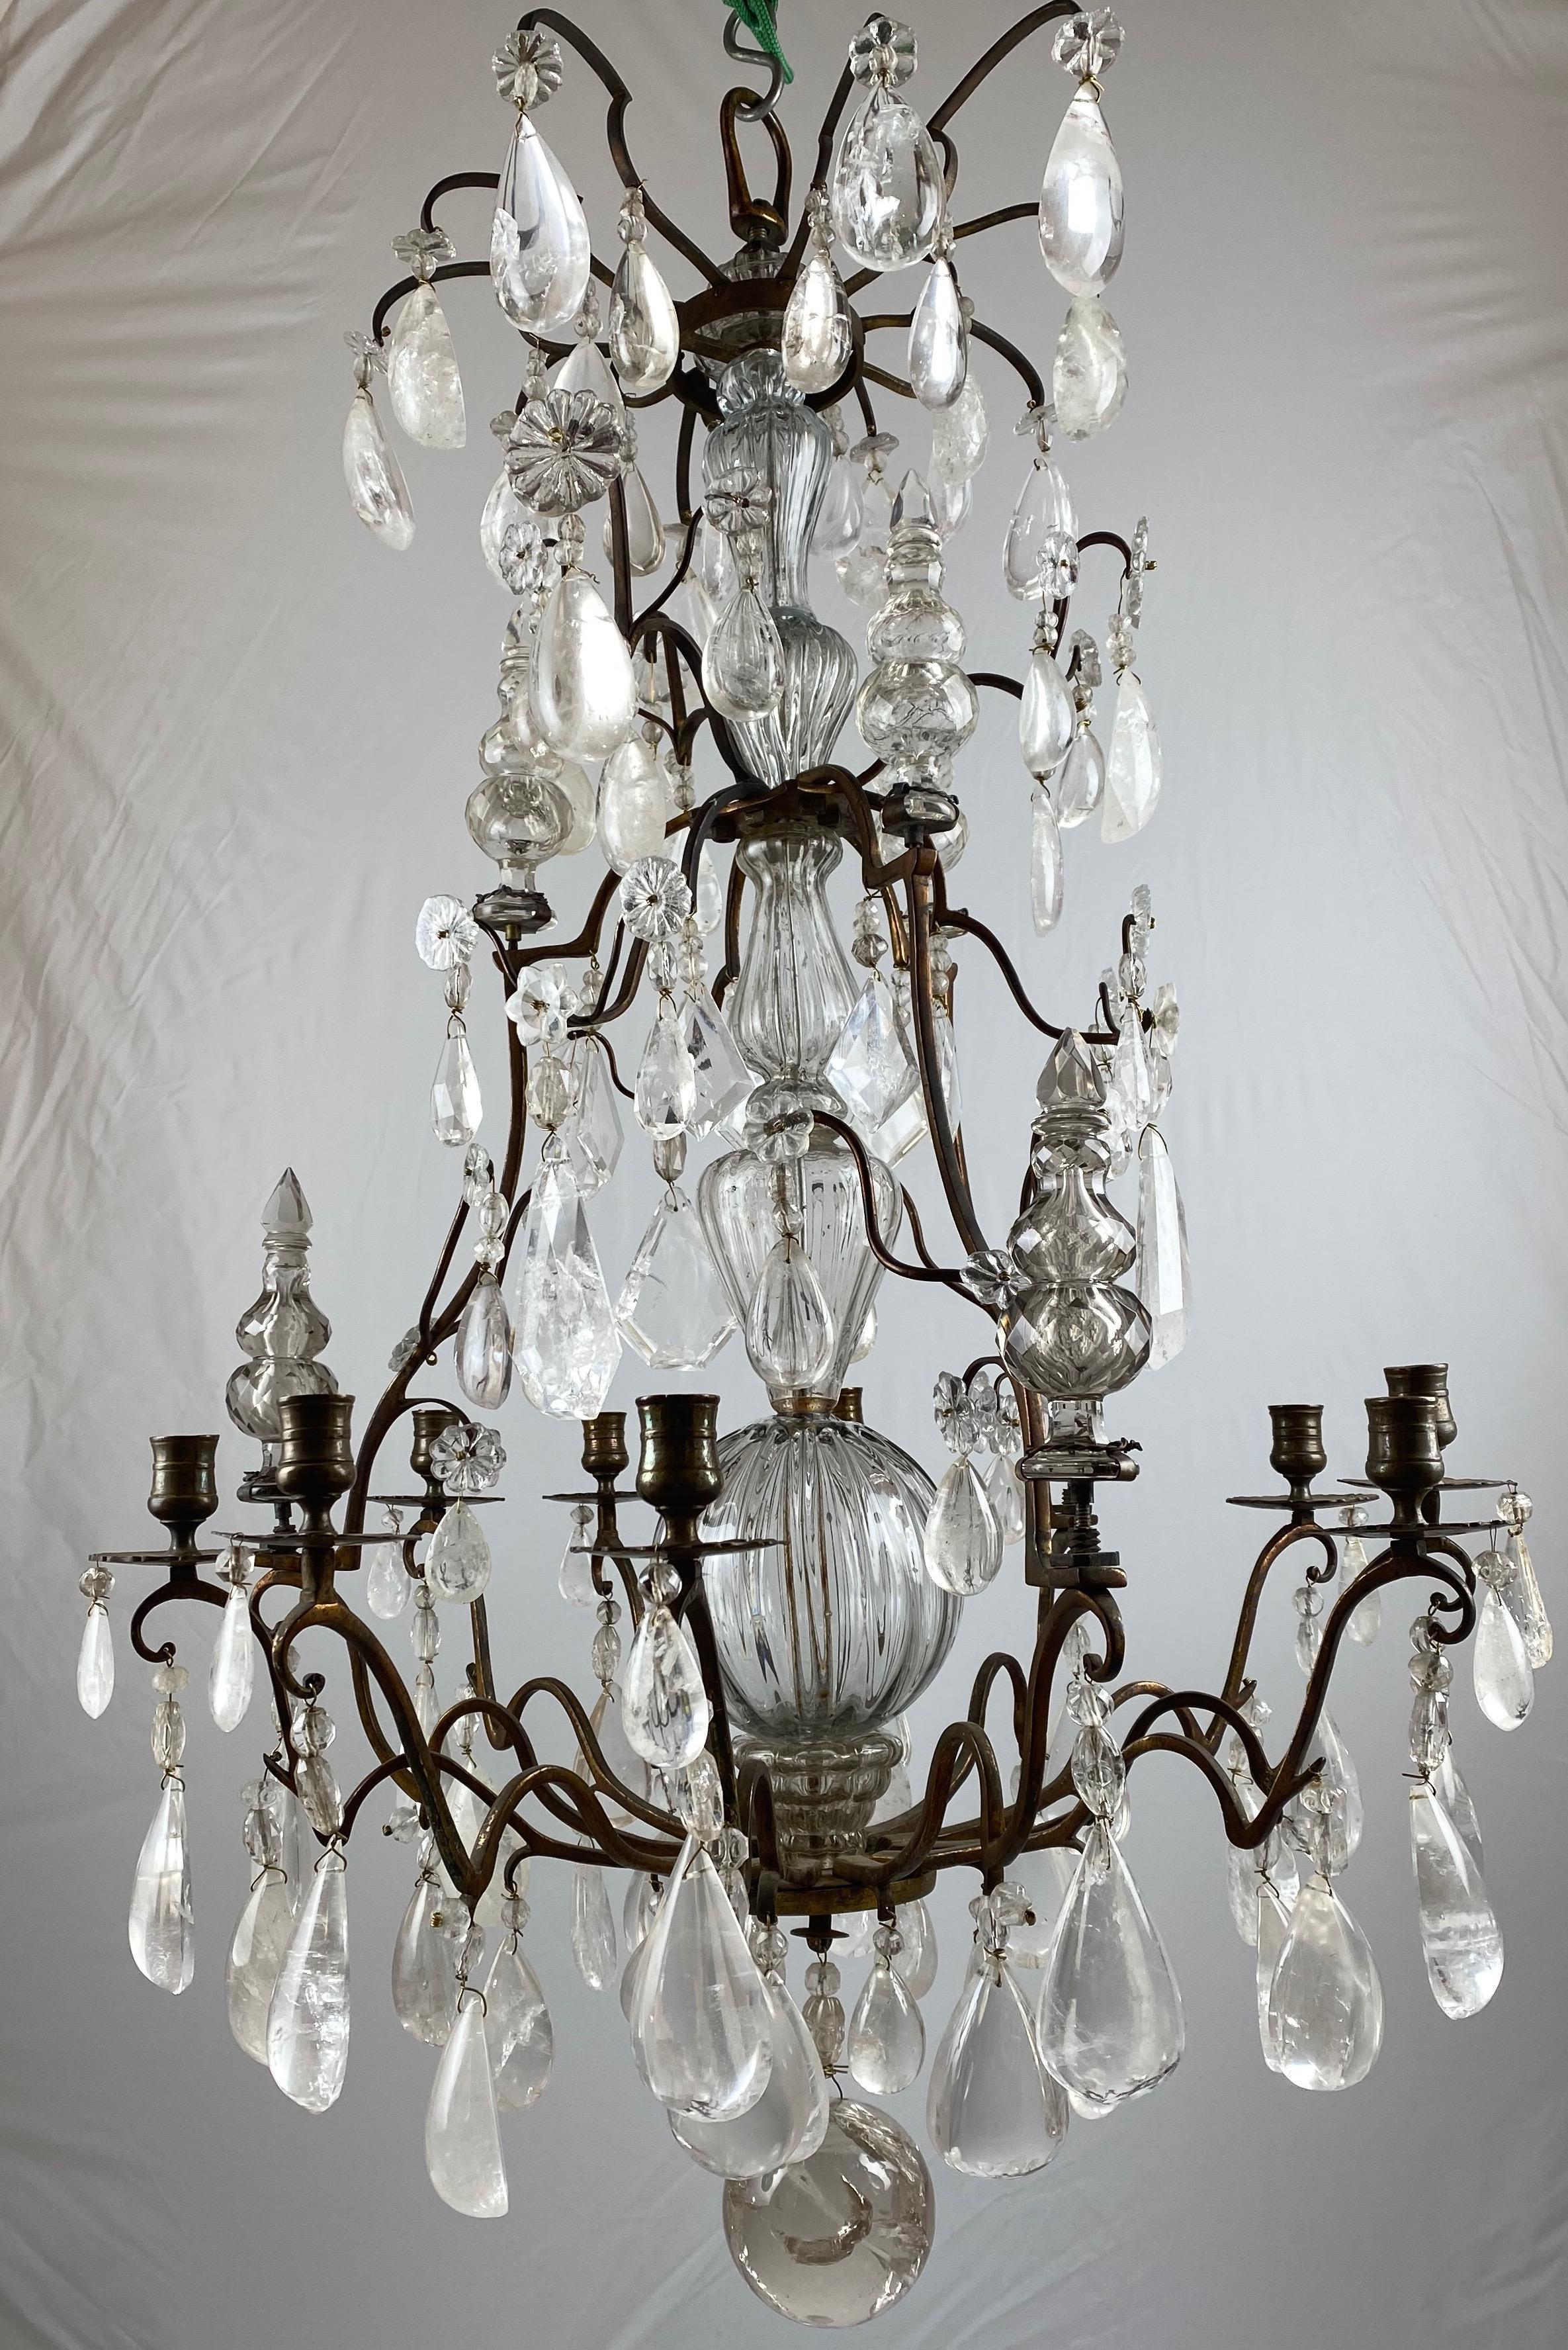 A marvellous chandelier. A mid-18th century chandelier with pendants of rock crystal. The metal frame is bronze and has a fantastic patina.
The central stem is made of hand blown glass.